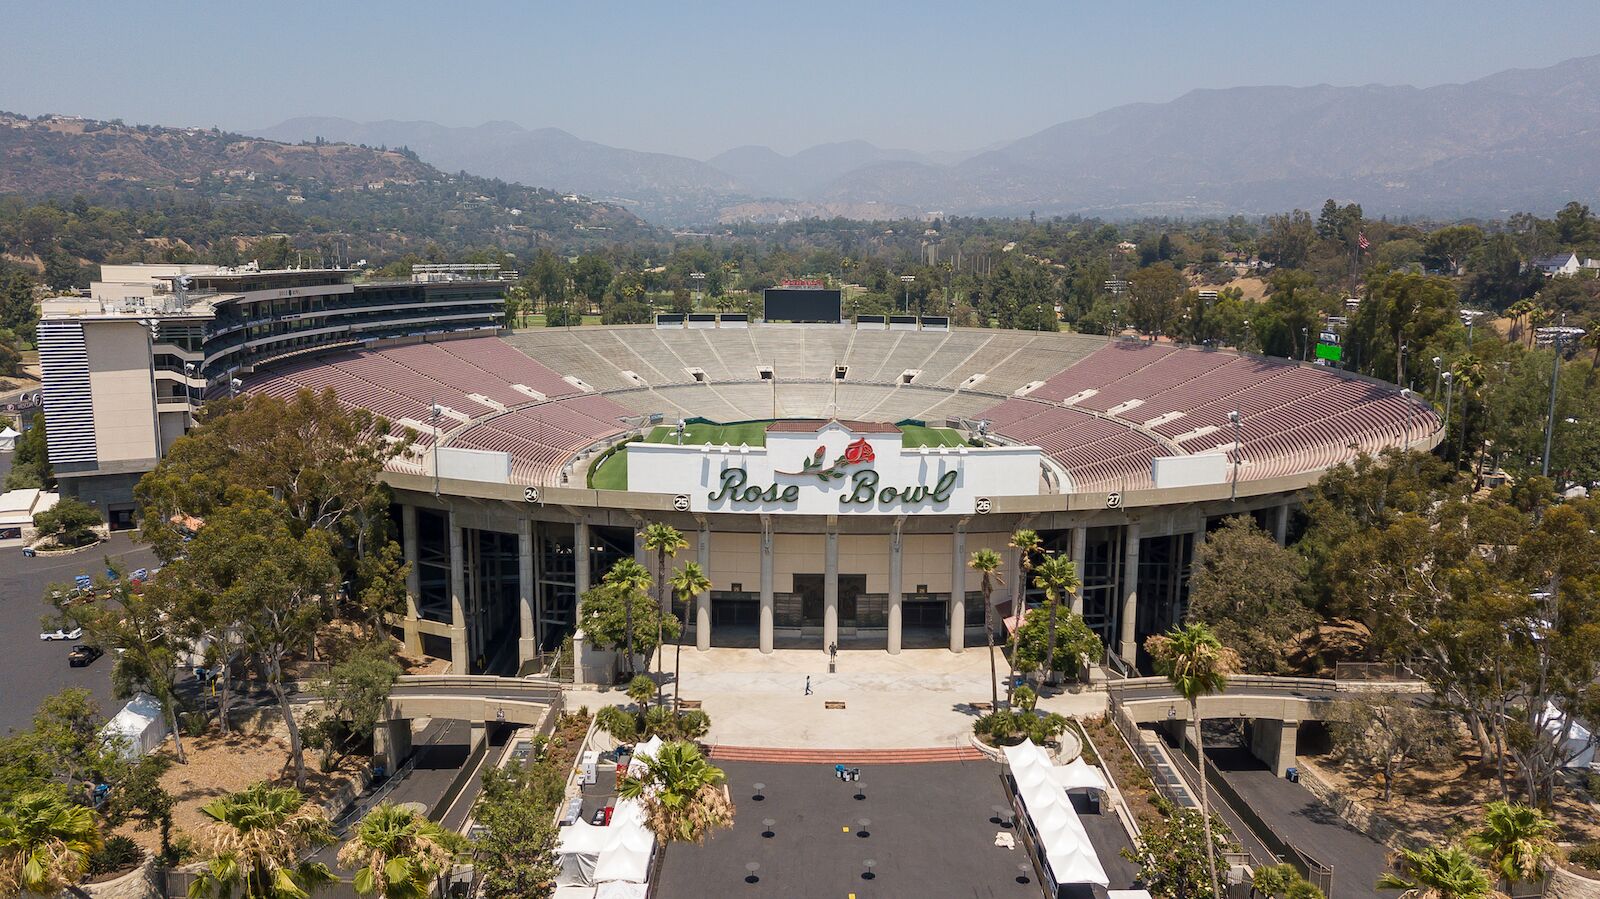 What to do in Pasadena: take a tour of the Rose Bowl stadium